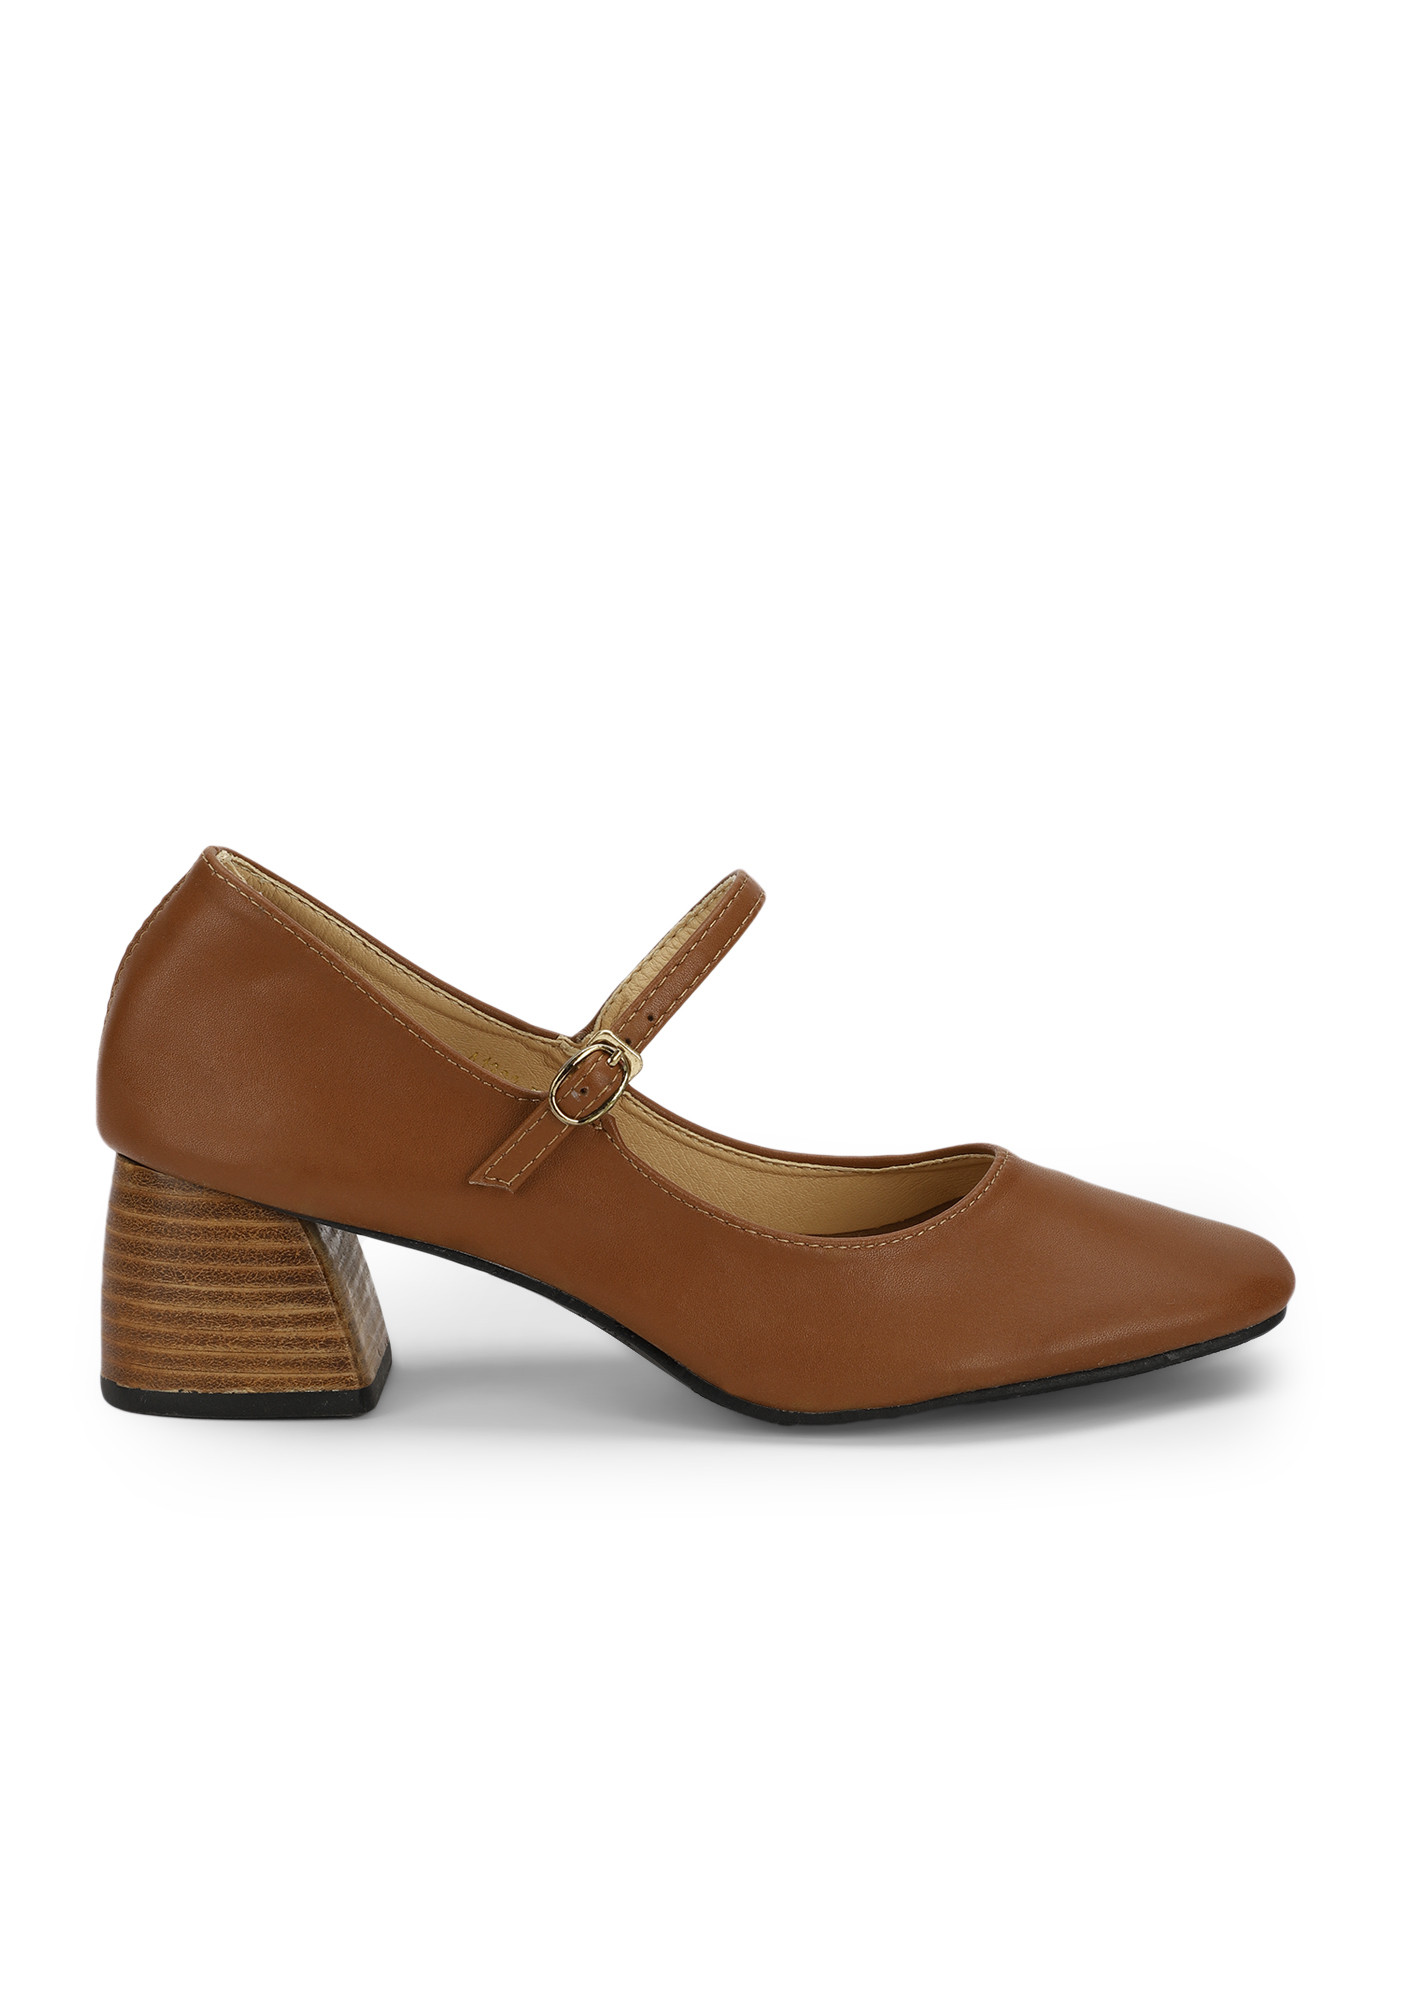 THE DECISION MAKER BROWN HEELED SHOES